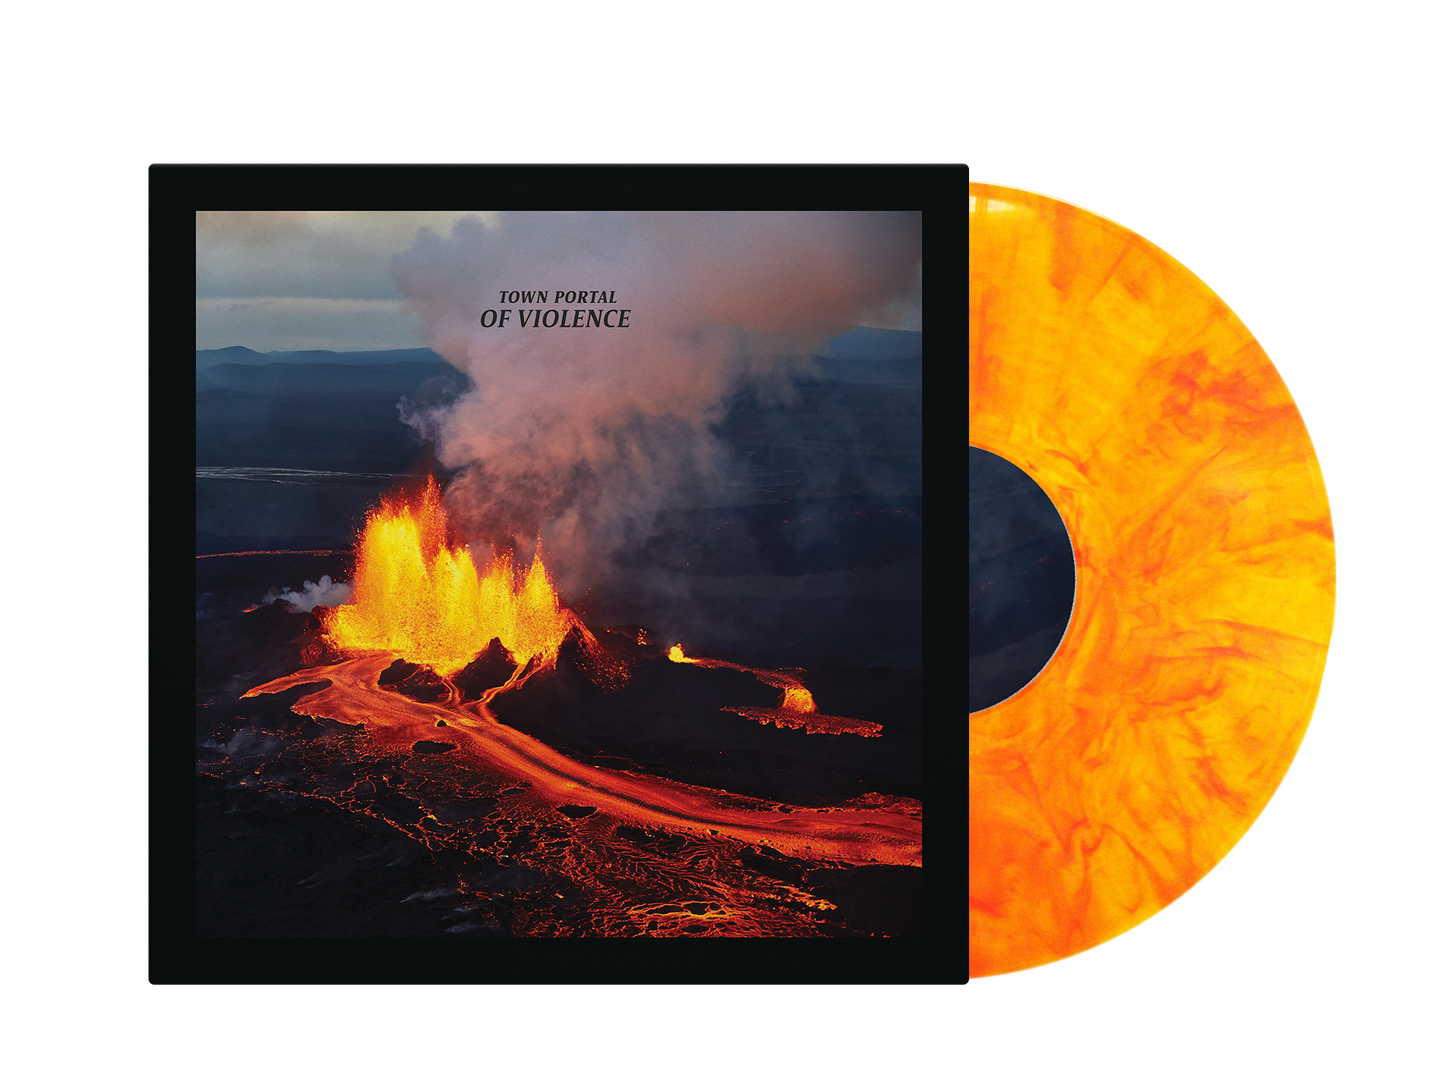 Of Violence (limited edition colored vinyl reprint)